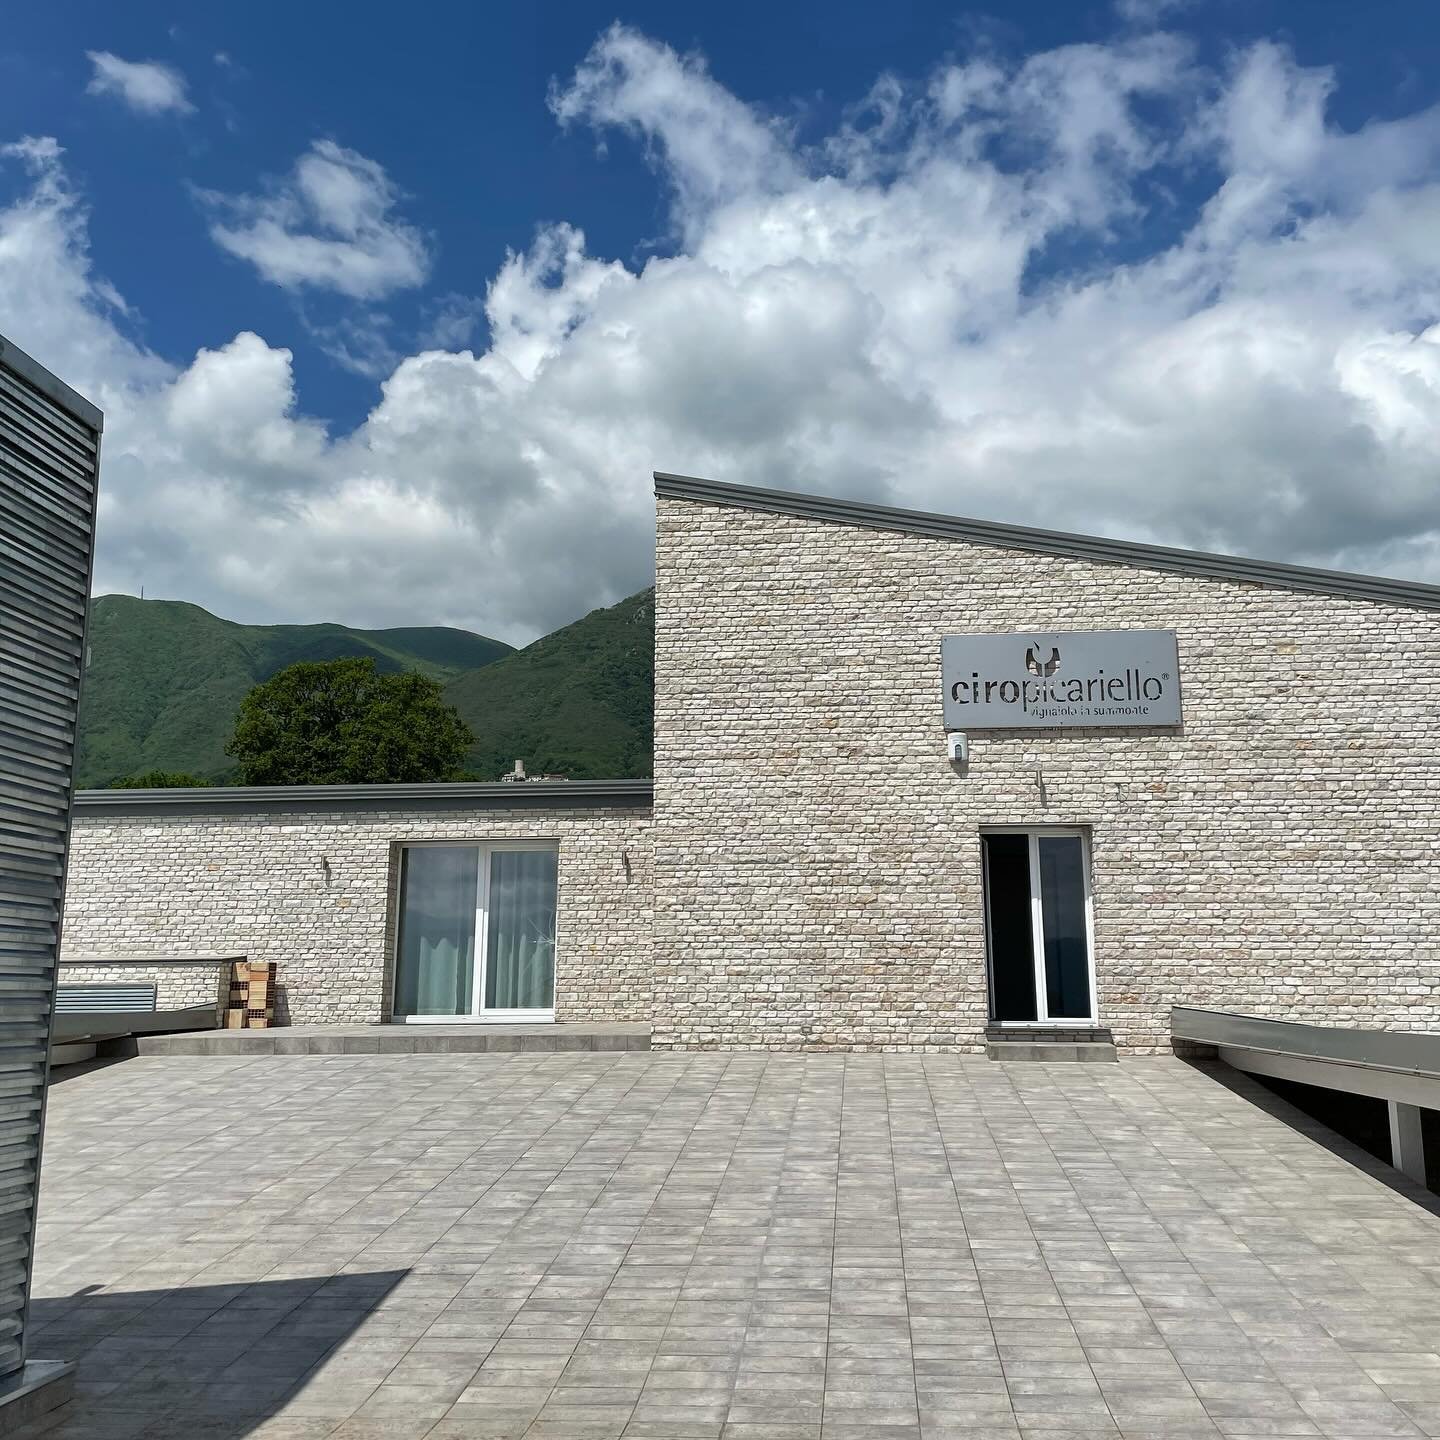 Some of the highest vineyards in Avellino are just below the brand new Ciro Picariello winery.  These are wines of focus and intensity with a mineral finish that is hard to find outside of Champagne and Chablis, and at nowhere near the cost. Their fo